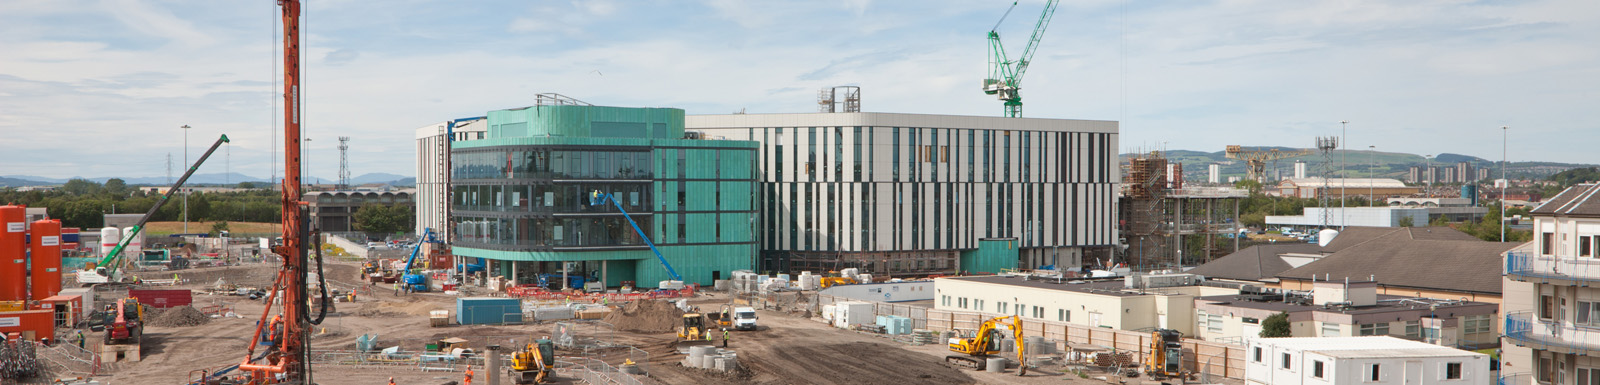 Construction work continues apace at the new South Glasgow Hospital campus